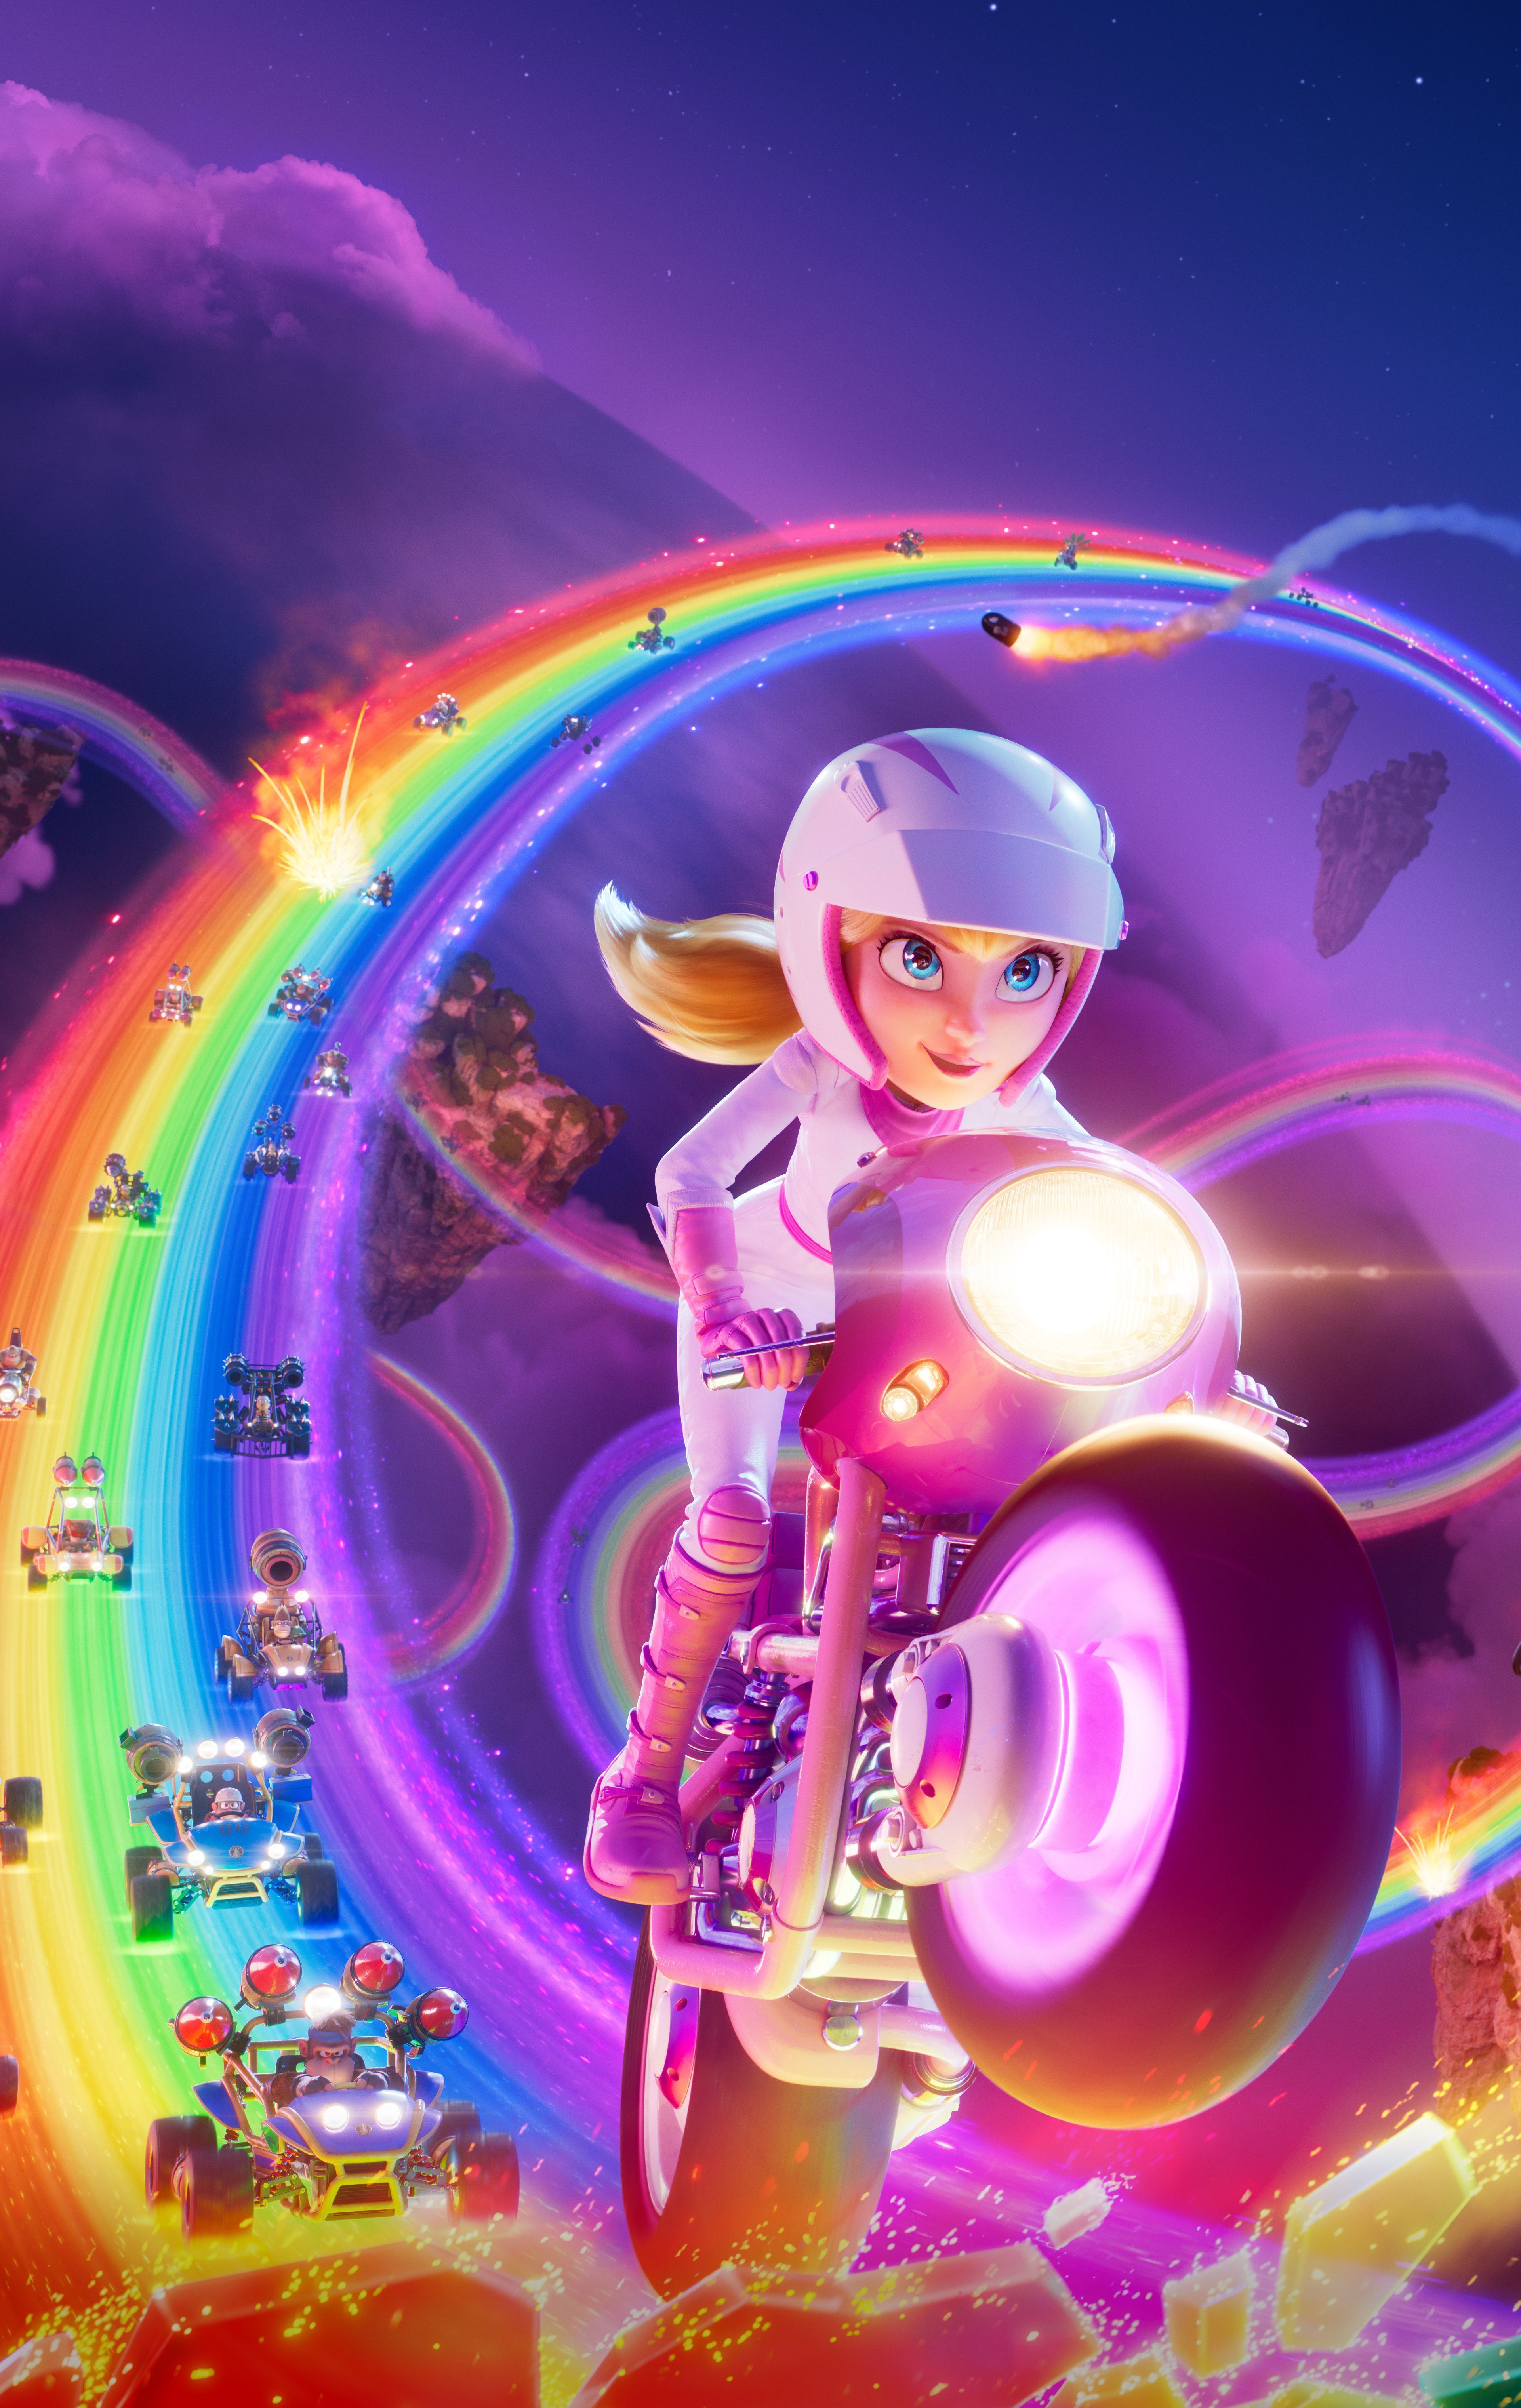 A character from the game Mario Kart rides a motorcycle through a rainbow. - Princess Peach